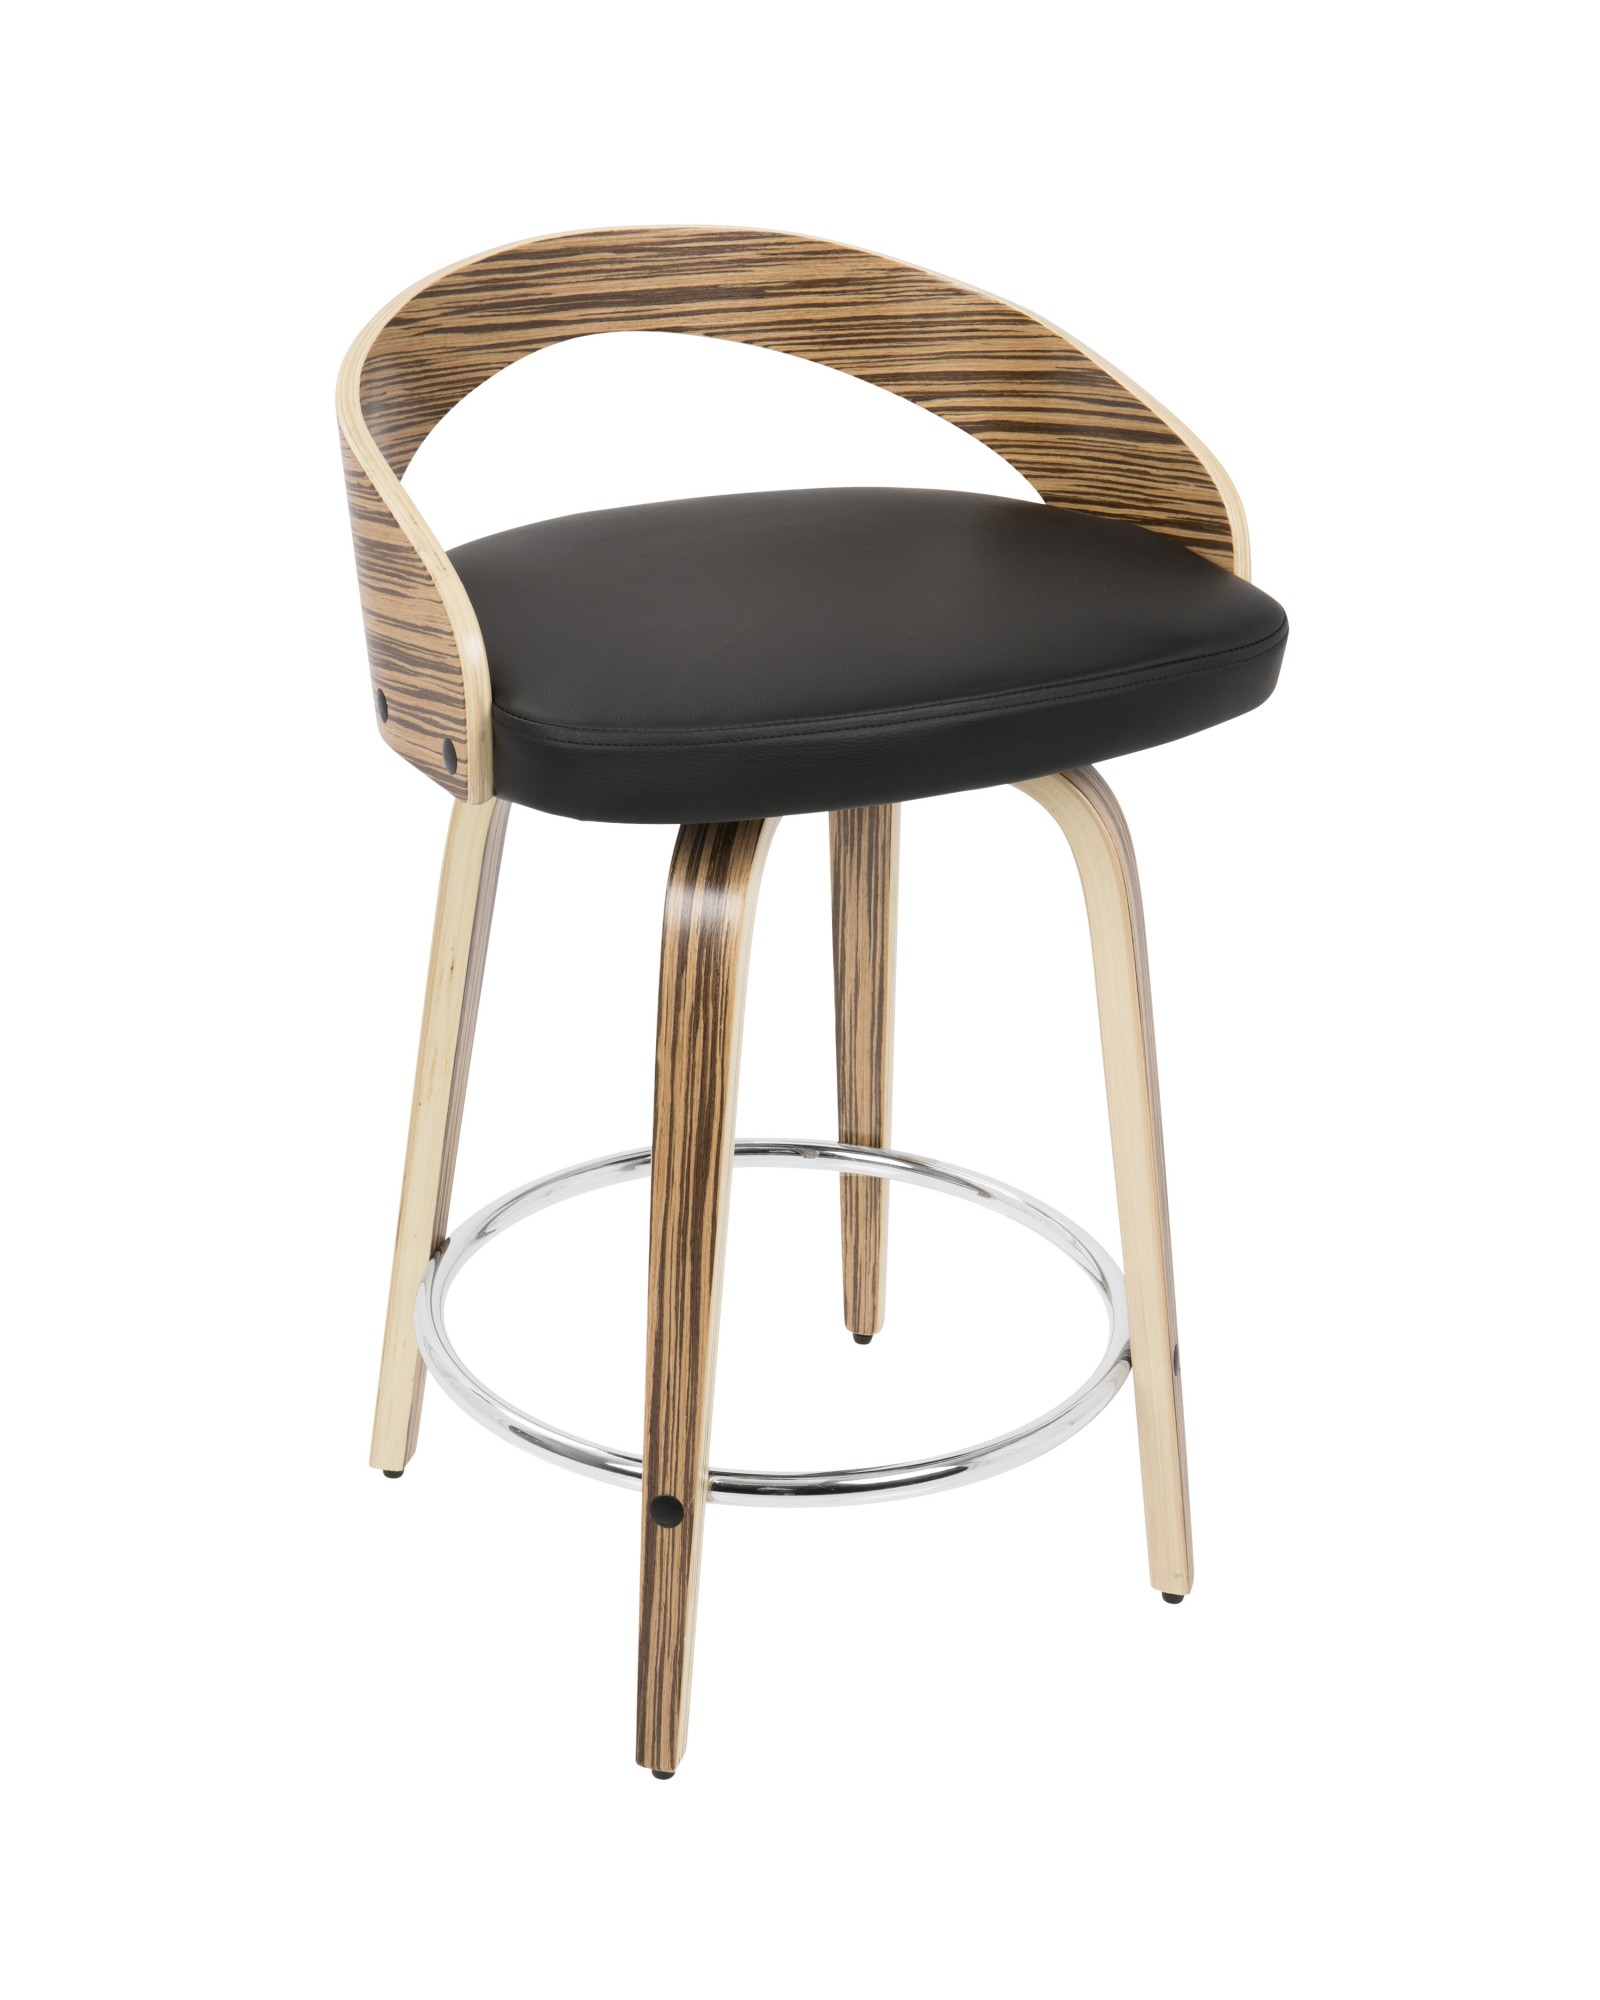 Grotto Mid-Century Modern Counter Stool with Swivel in Zebra Wood and Black Faux Leather